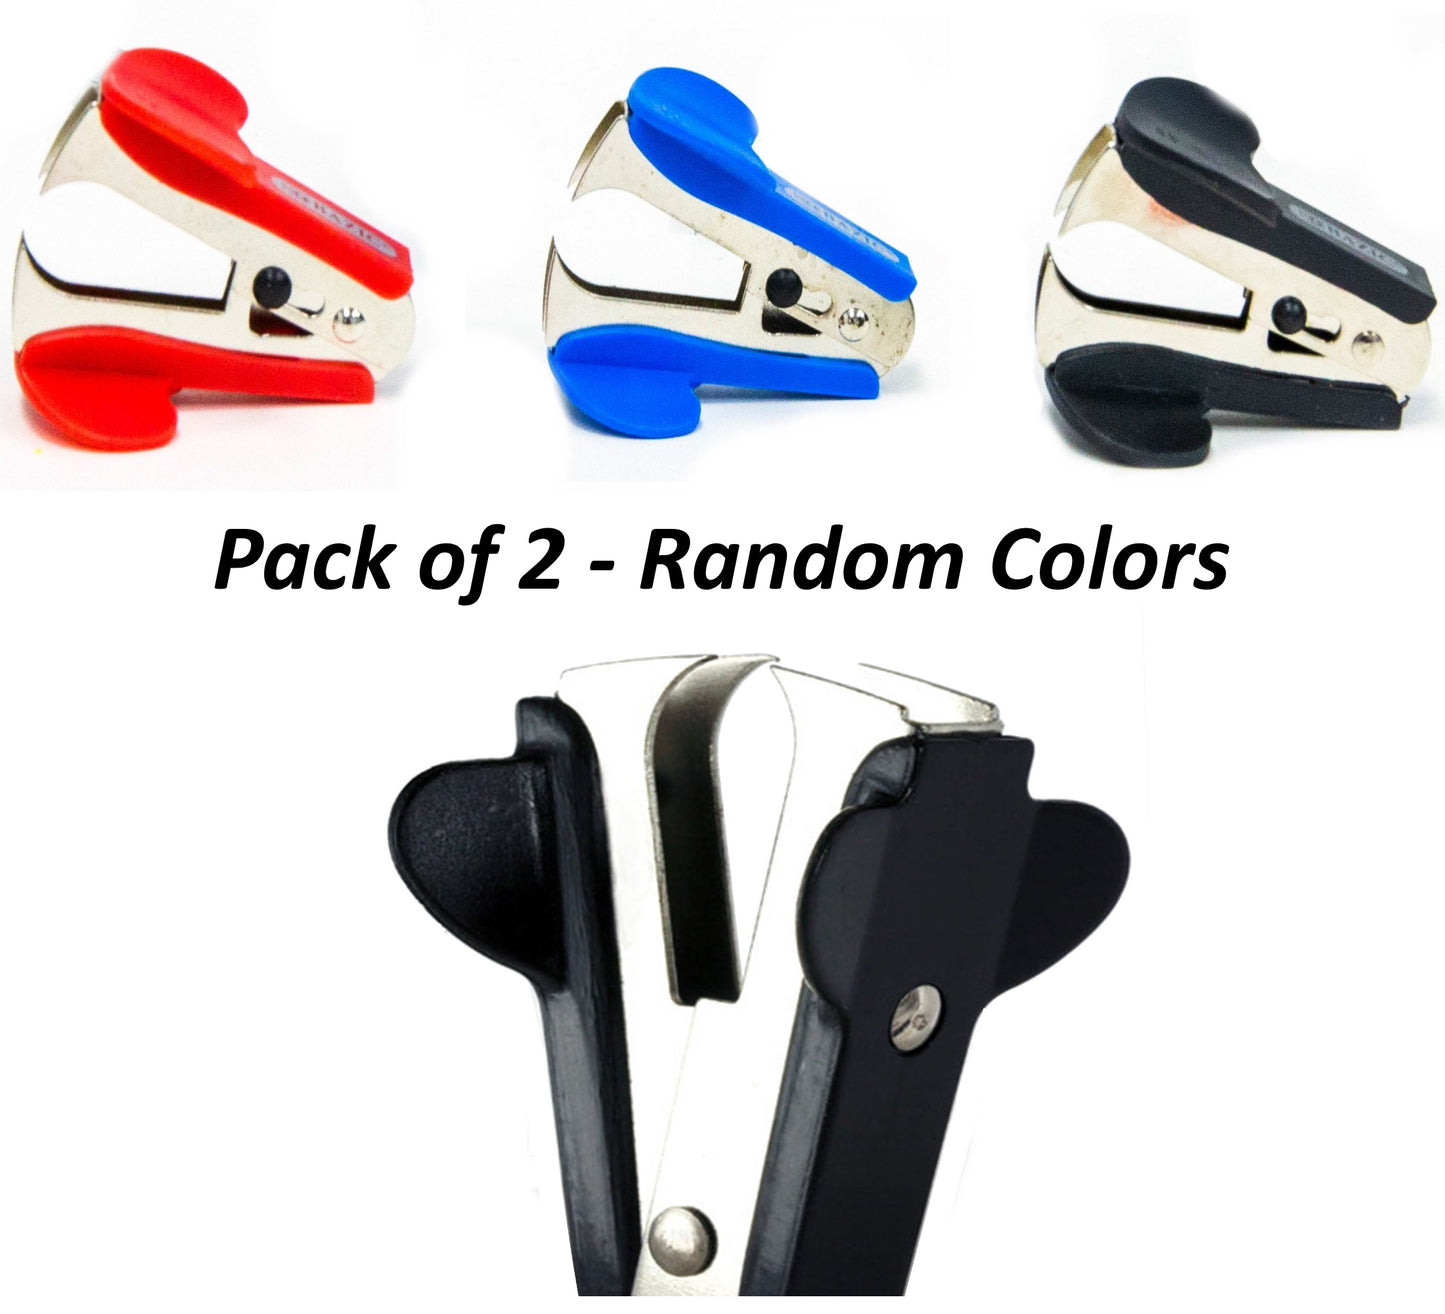 4 Pcs Claw Style Staples Remover with Safety Lock - Random Color, Home, School and Office